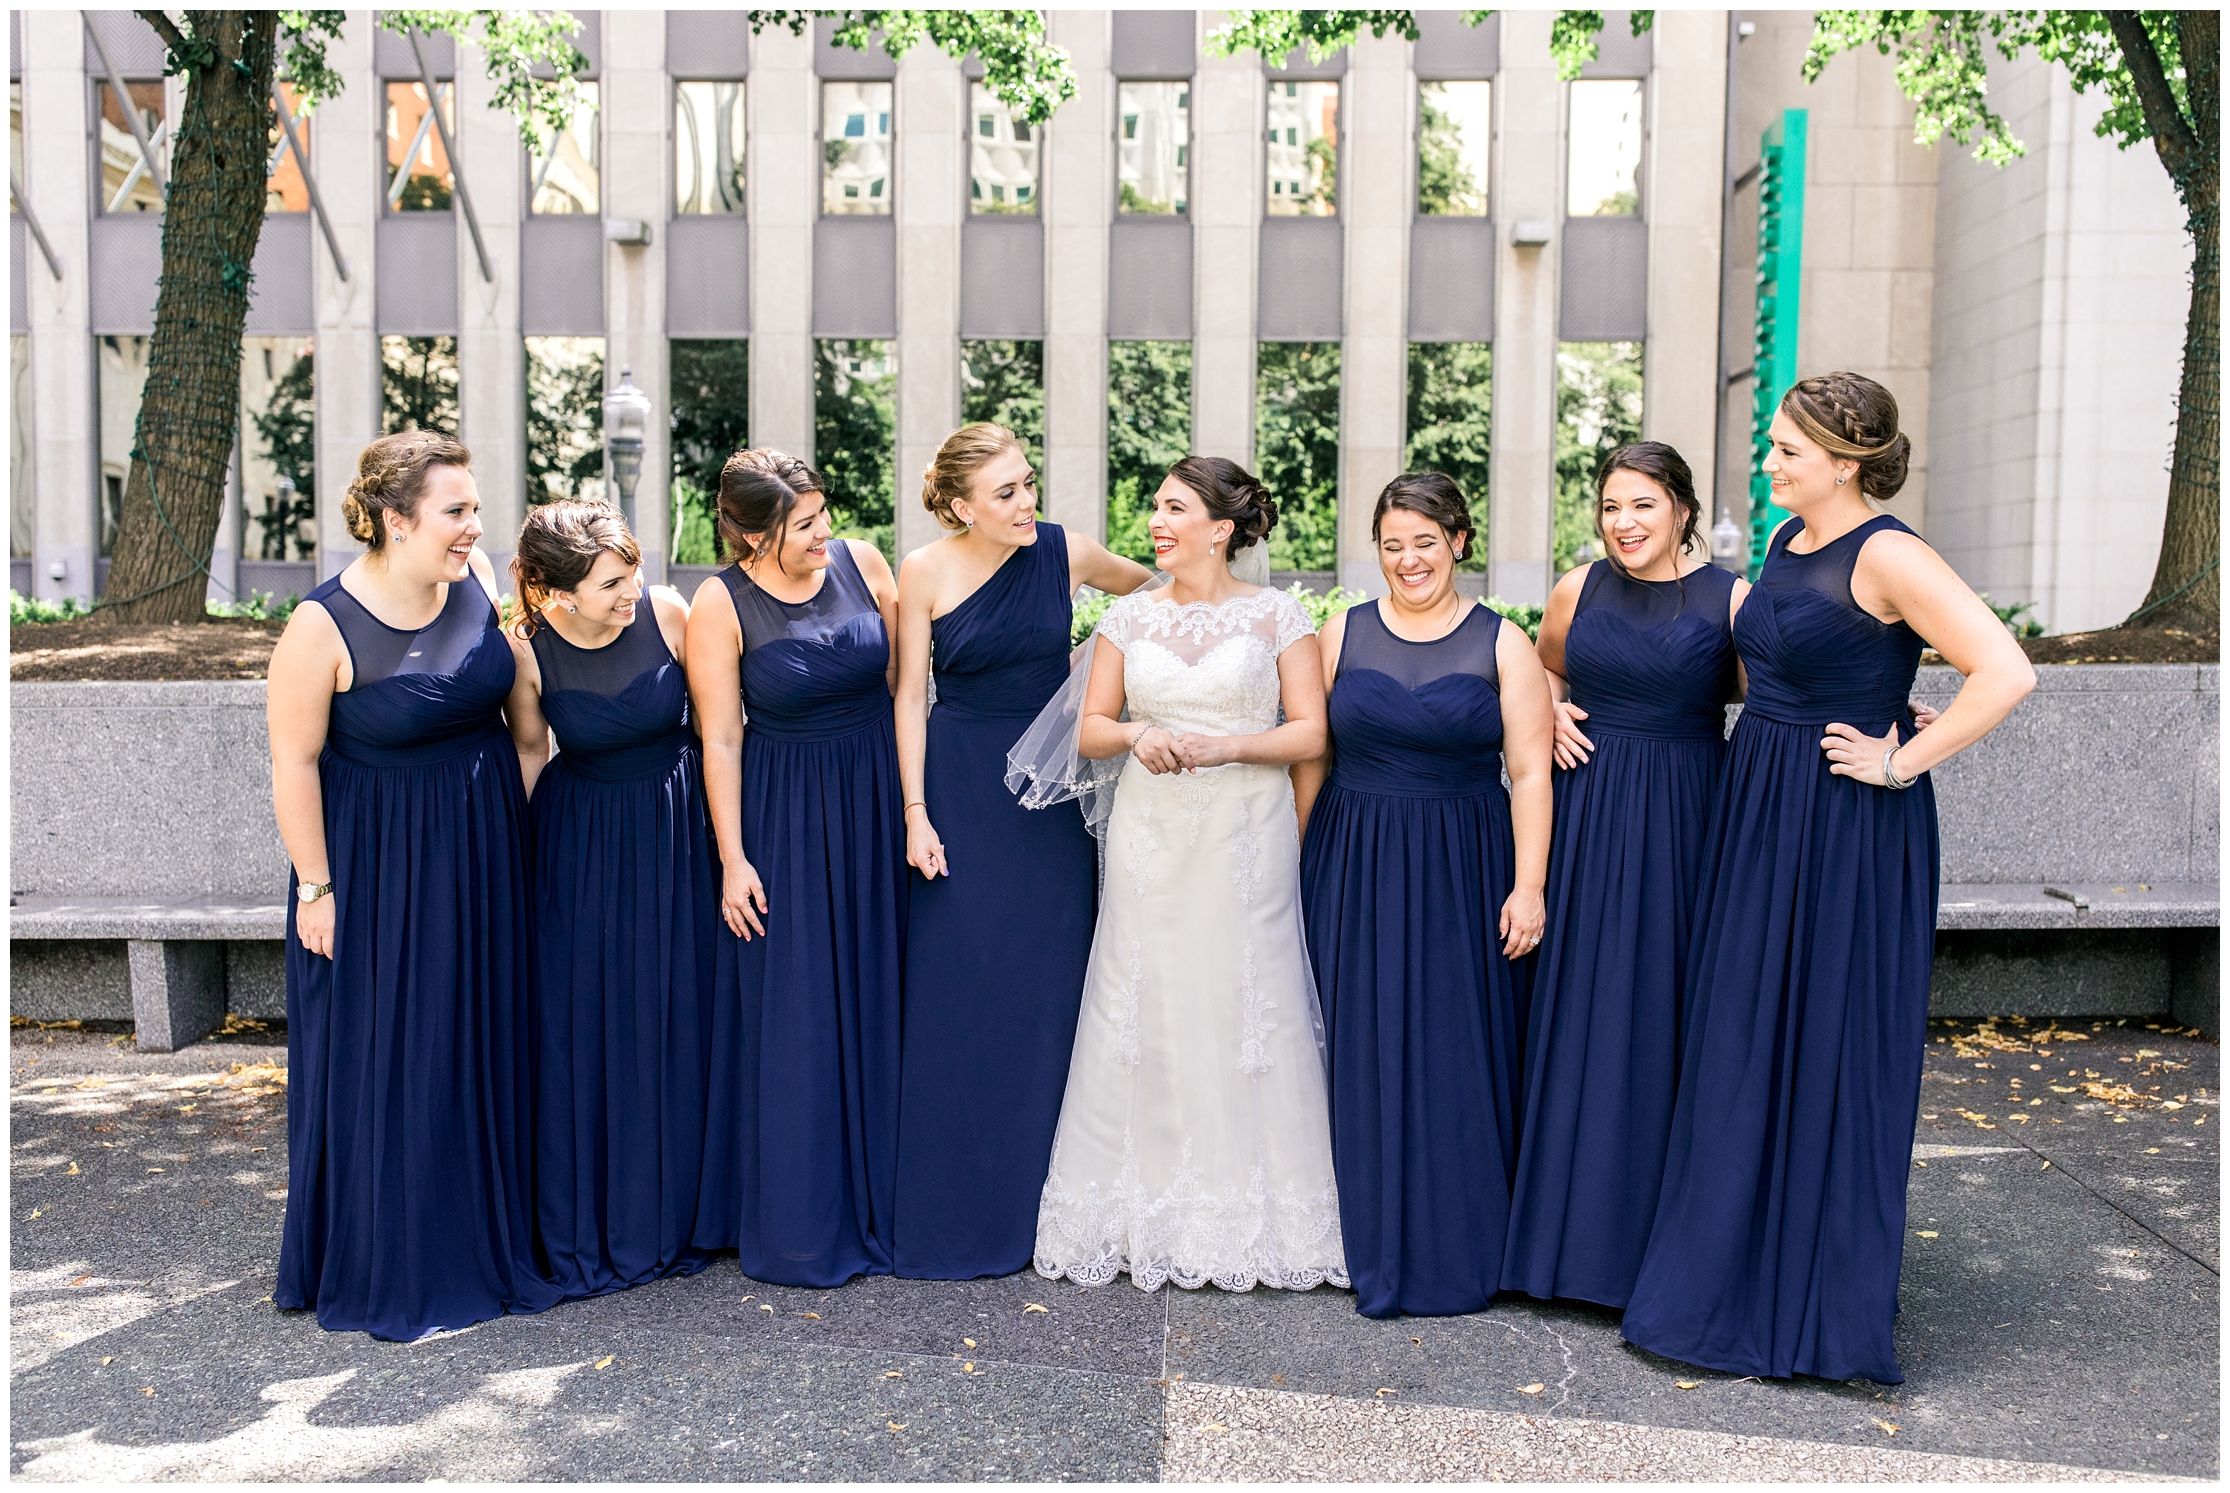 long navy blue bridesmiads dresses, blue and coral wedding, blue and coral wedding pittsburgh, pittsburgh bride, pittsburgh wedding, pittsburgh bridal party, upscale pittsburgh wedding, Mellon Square Pittsburgh, Mellon Square Wedding Photos, Mellon Square Wedding Photographer, Mellon Square Wedding Photography, Onmi William Penn Pittsburgh Pa, Omni William Penn Hotel Wedding, Omni WIlliam Penn Wedding photo, Omni William Penn Wedding photographer, Best Wedding Photographer in Pittsburgh, Best Omni William Penn Wedding Photos, Best Omni William Penn Wedding pictures